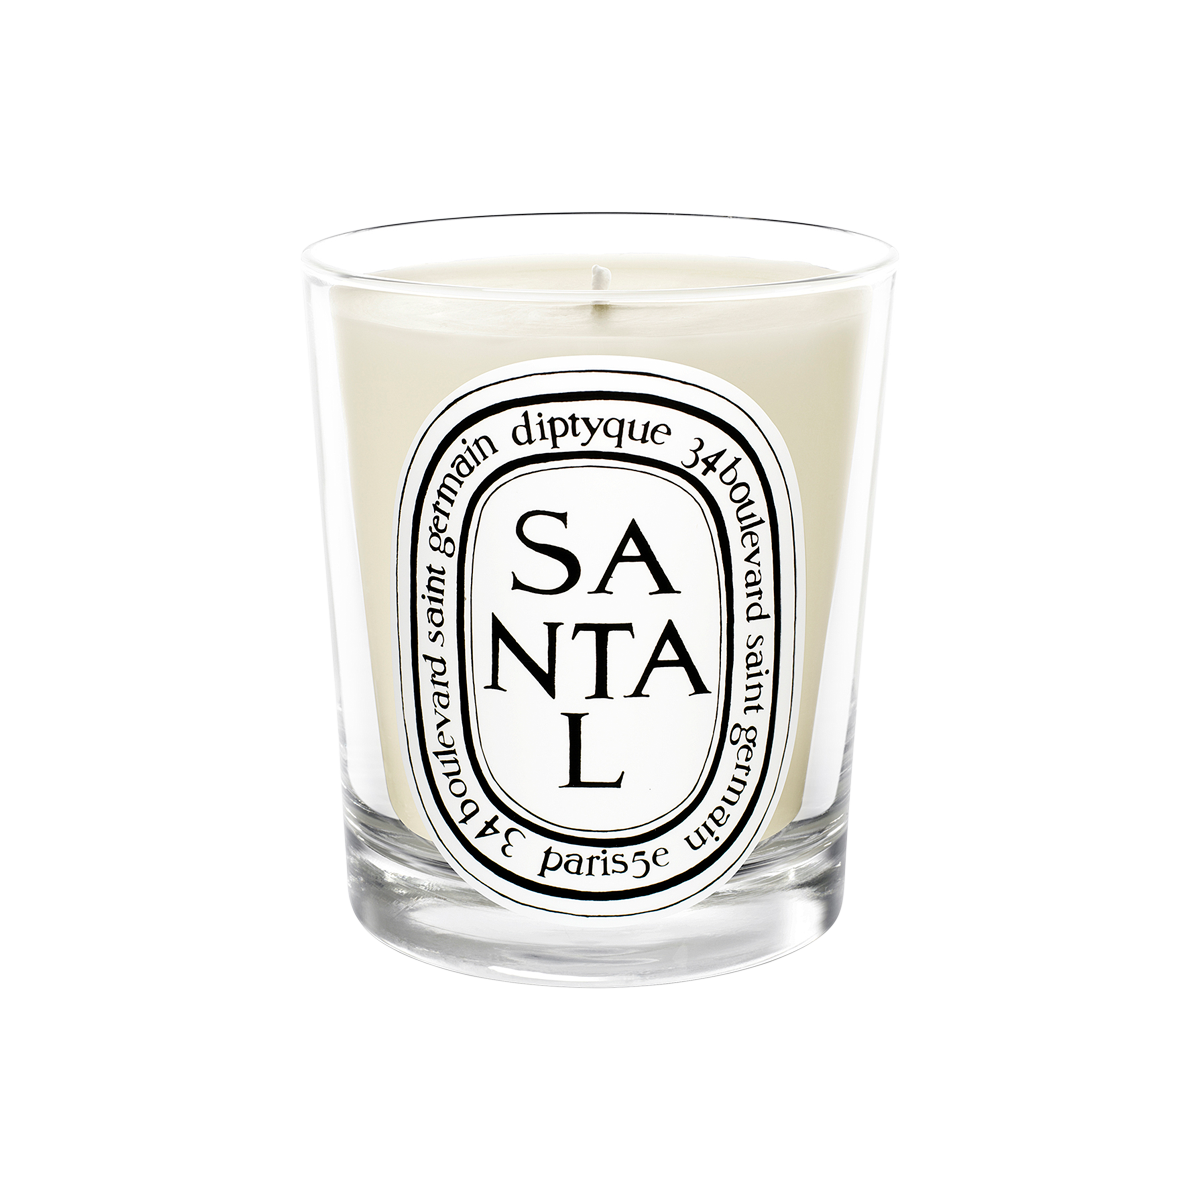 Diptyque - Santal Scented Candle